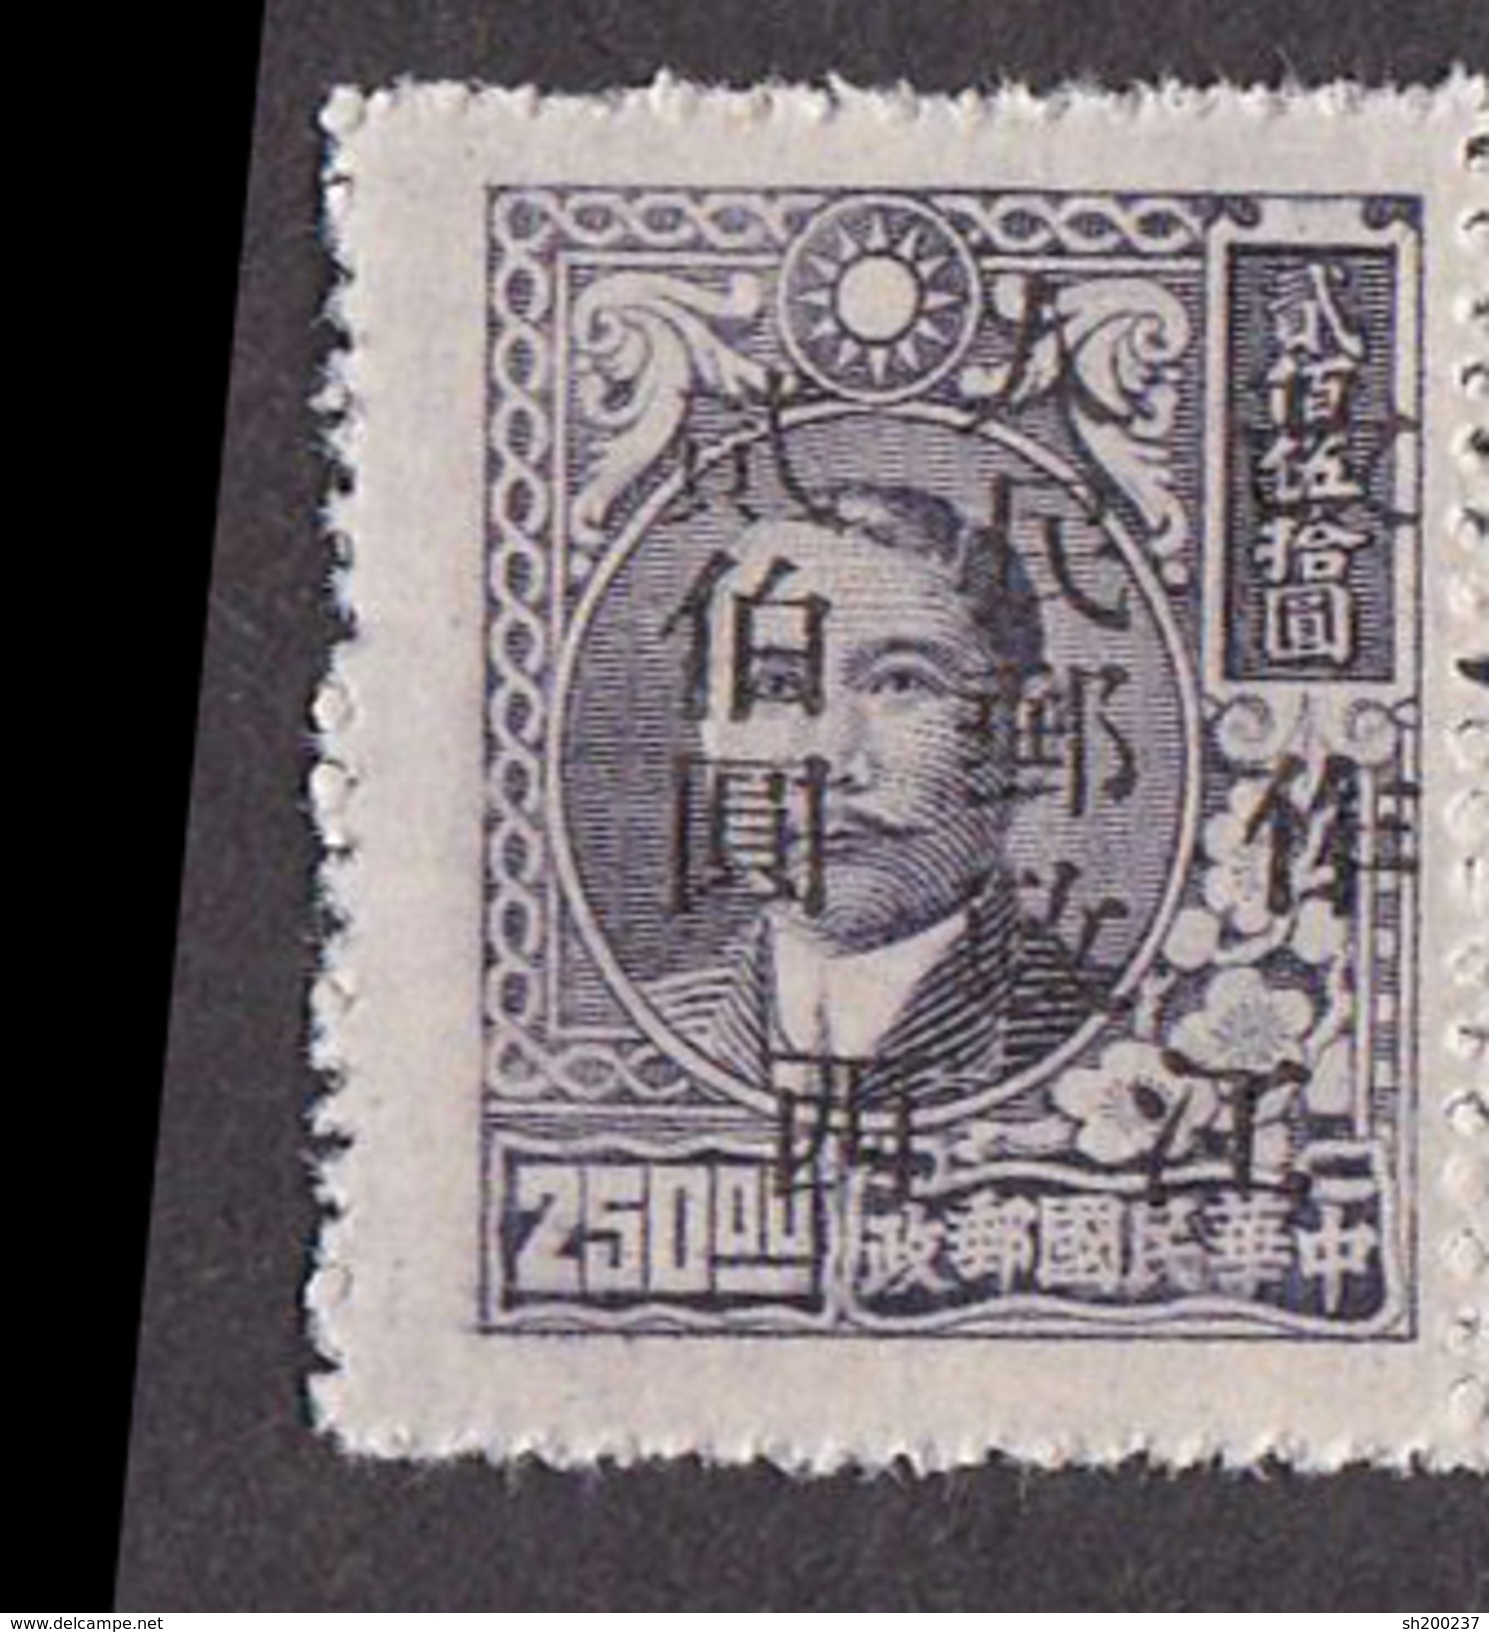 Liberated  Central China 1949  CC159 (6L32) $200 On $250 Slate Voilet - Centraal-China 1948-49